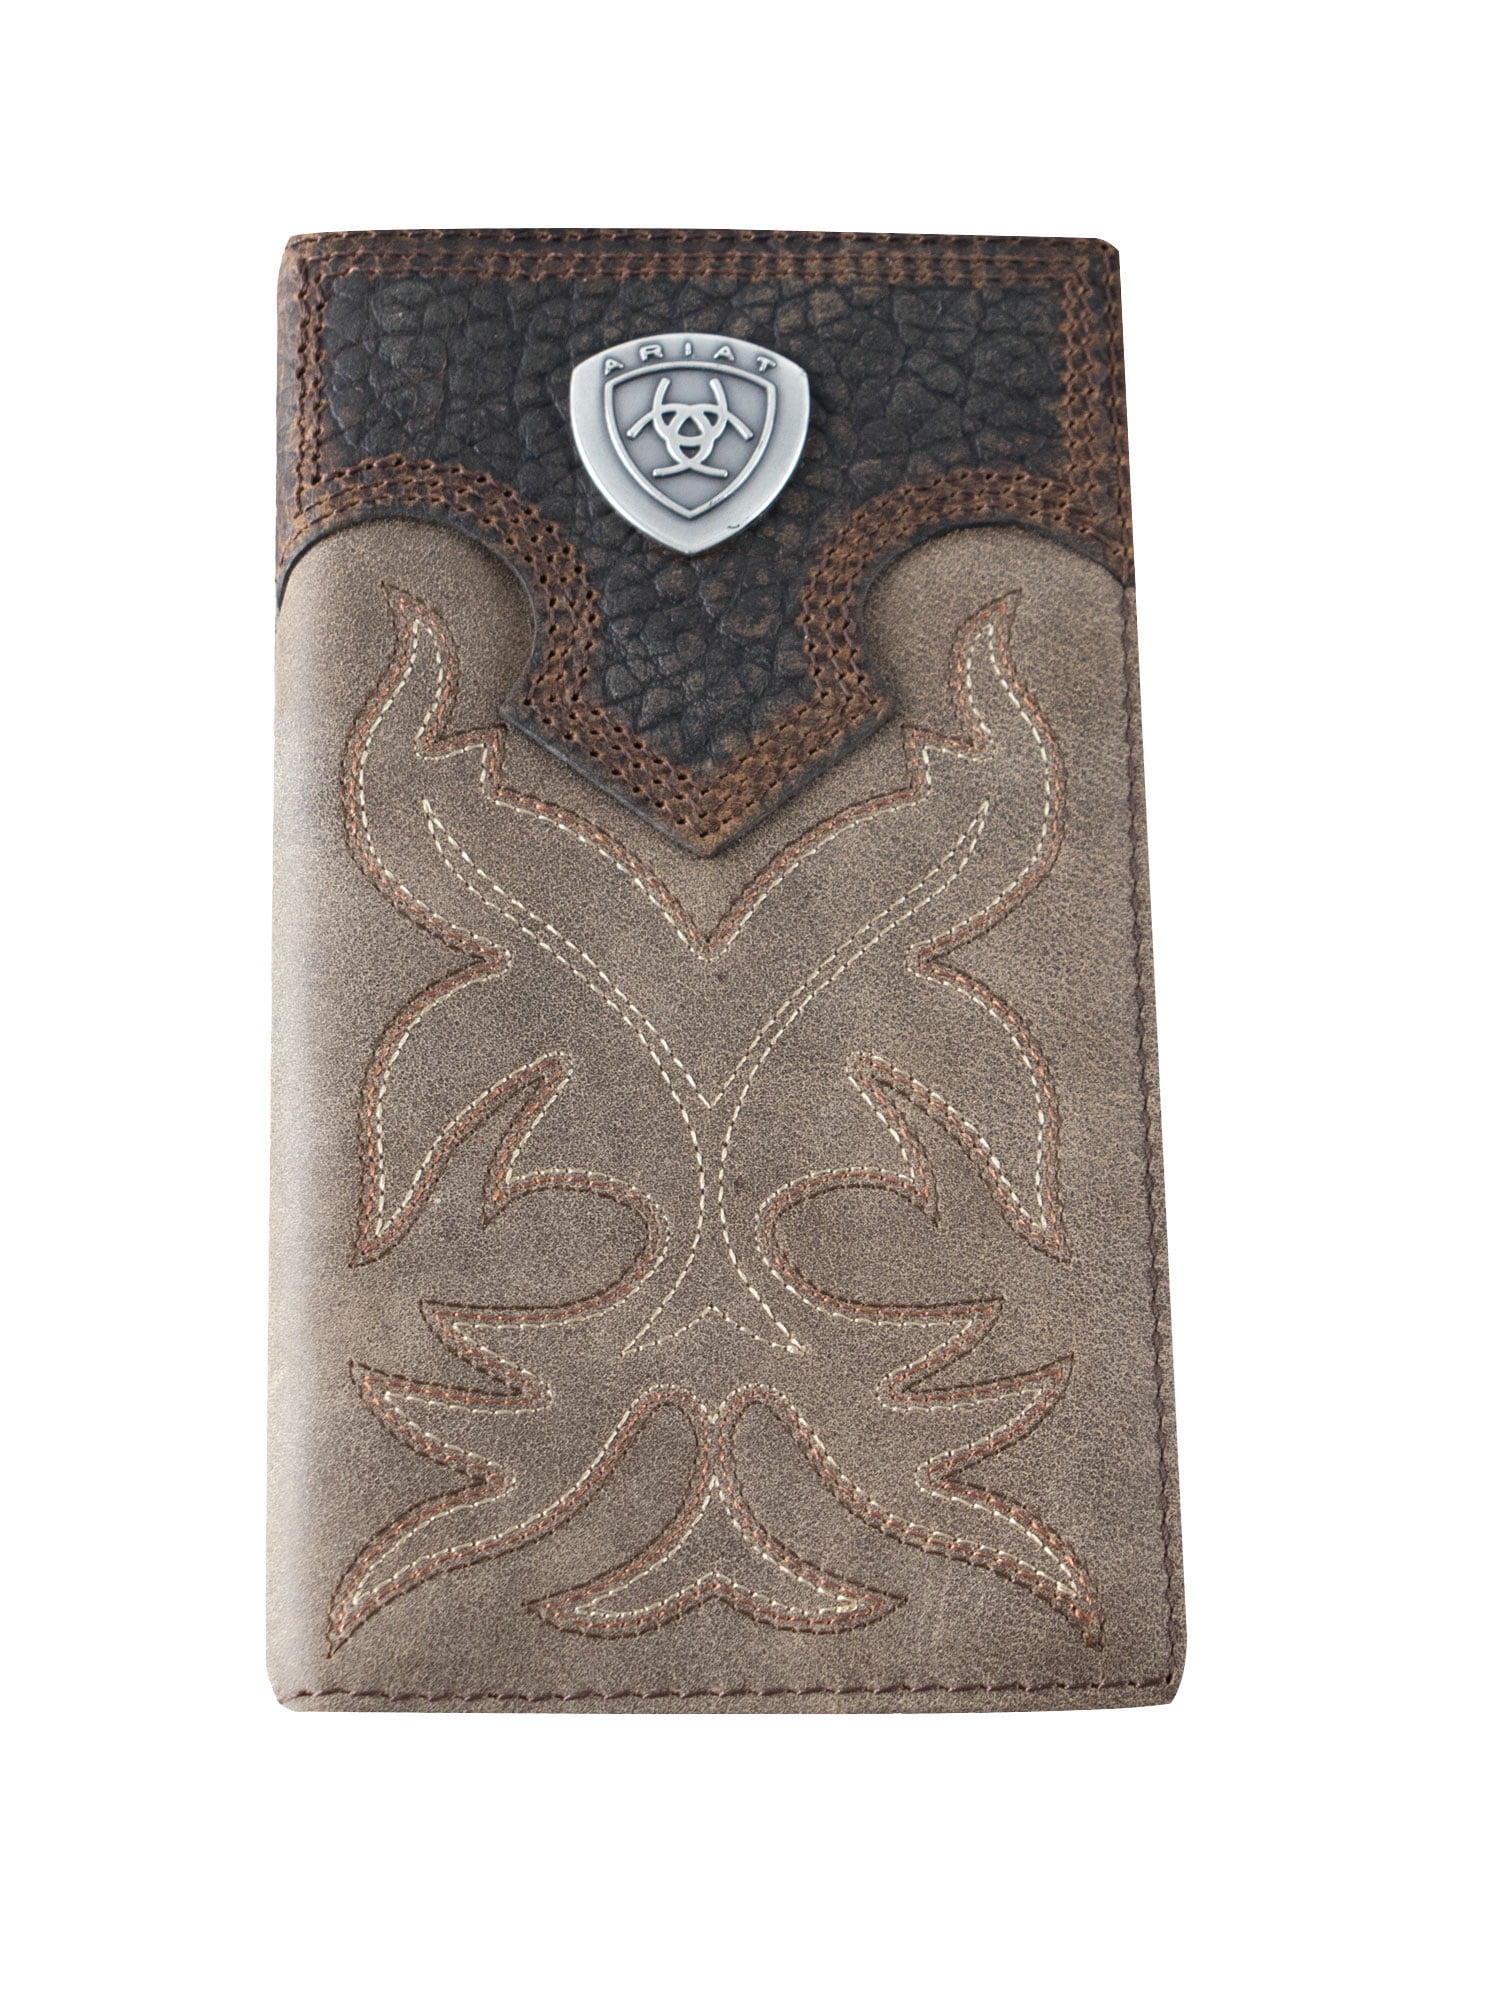 Ariat Western Mens Wallet Rodeo Leather Embroidery Concho Brown A3510844 